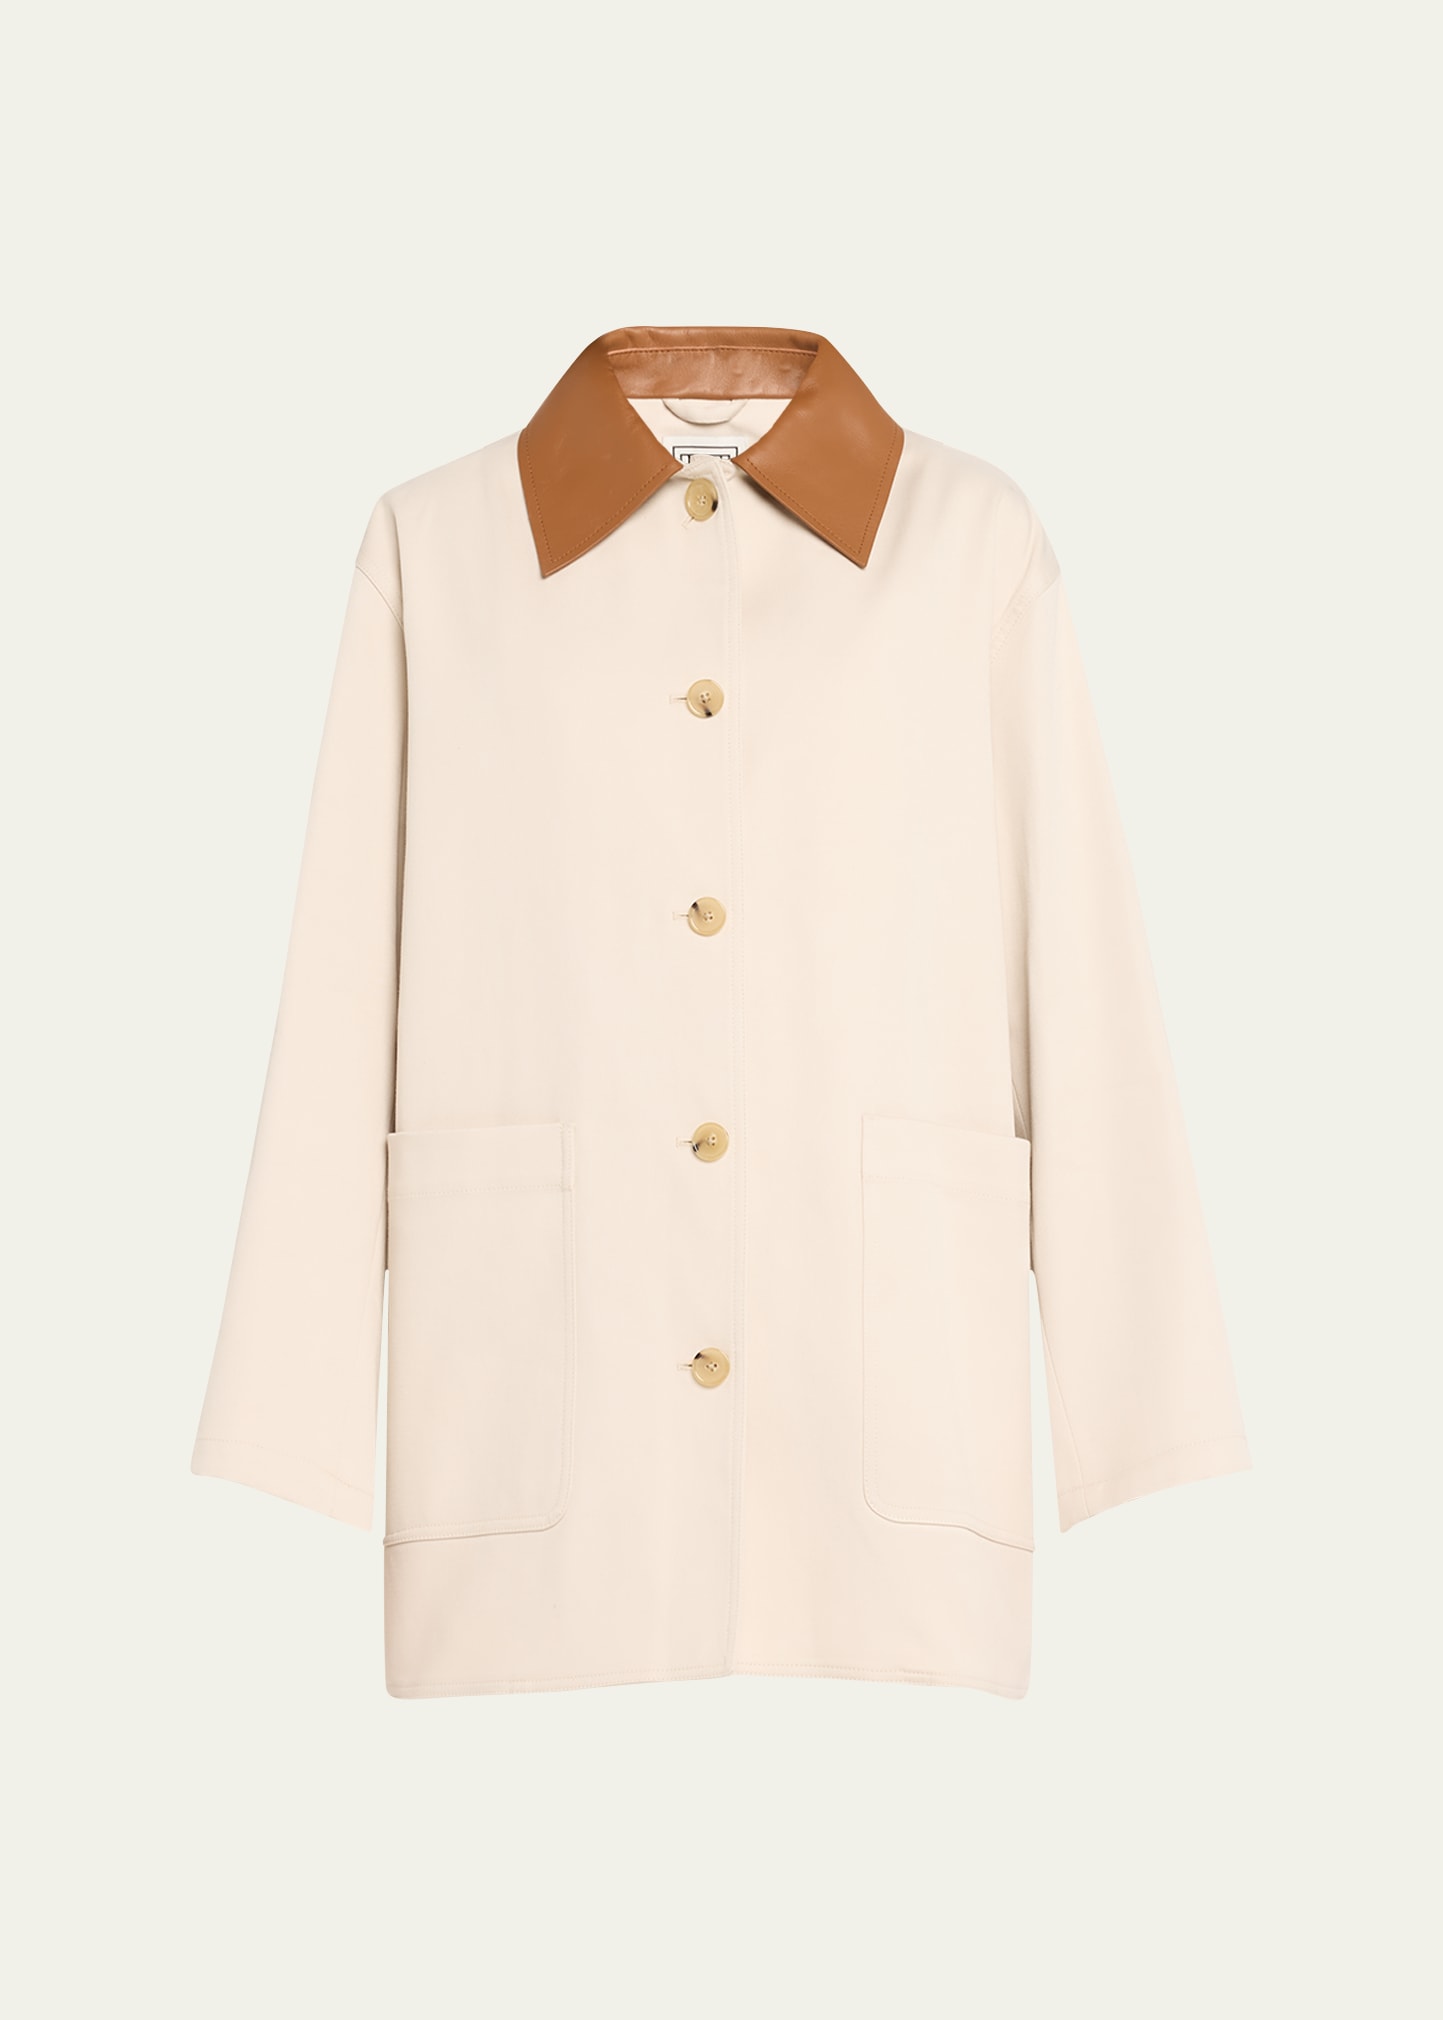 Organic Cotton Barn Jacket with Leather Collar